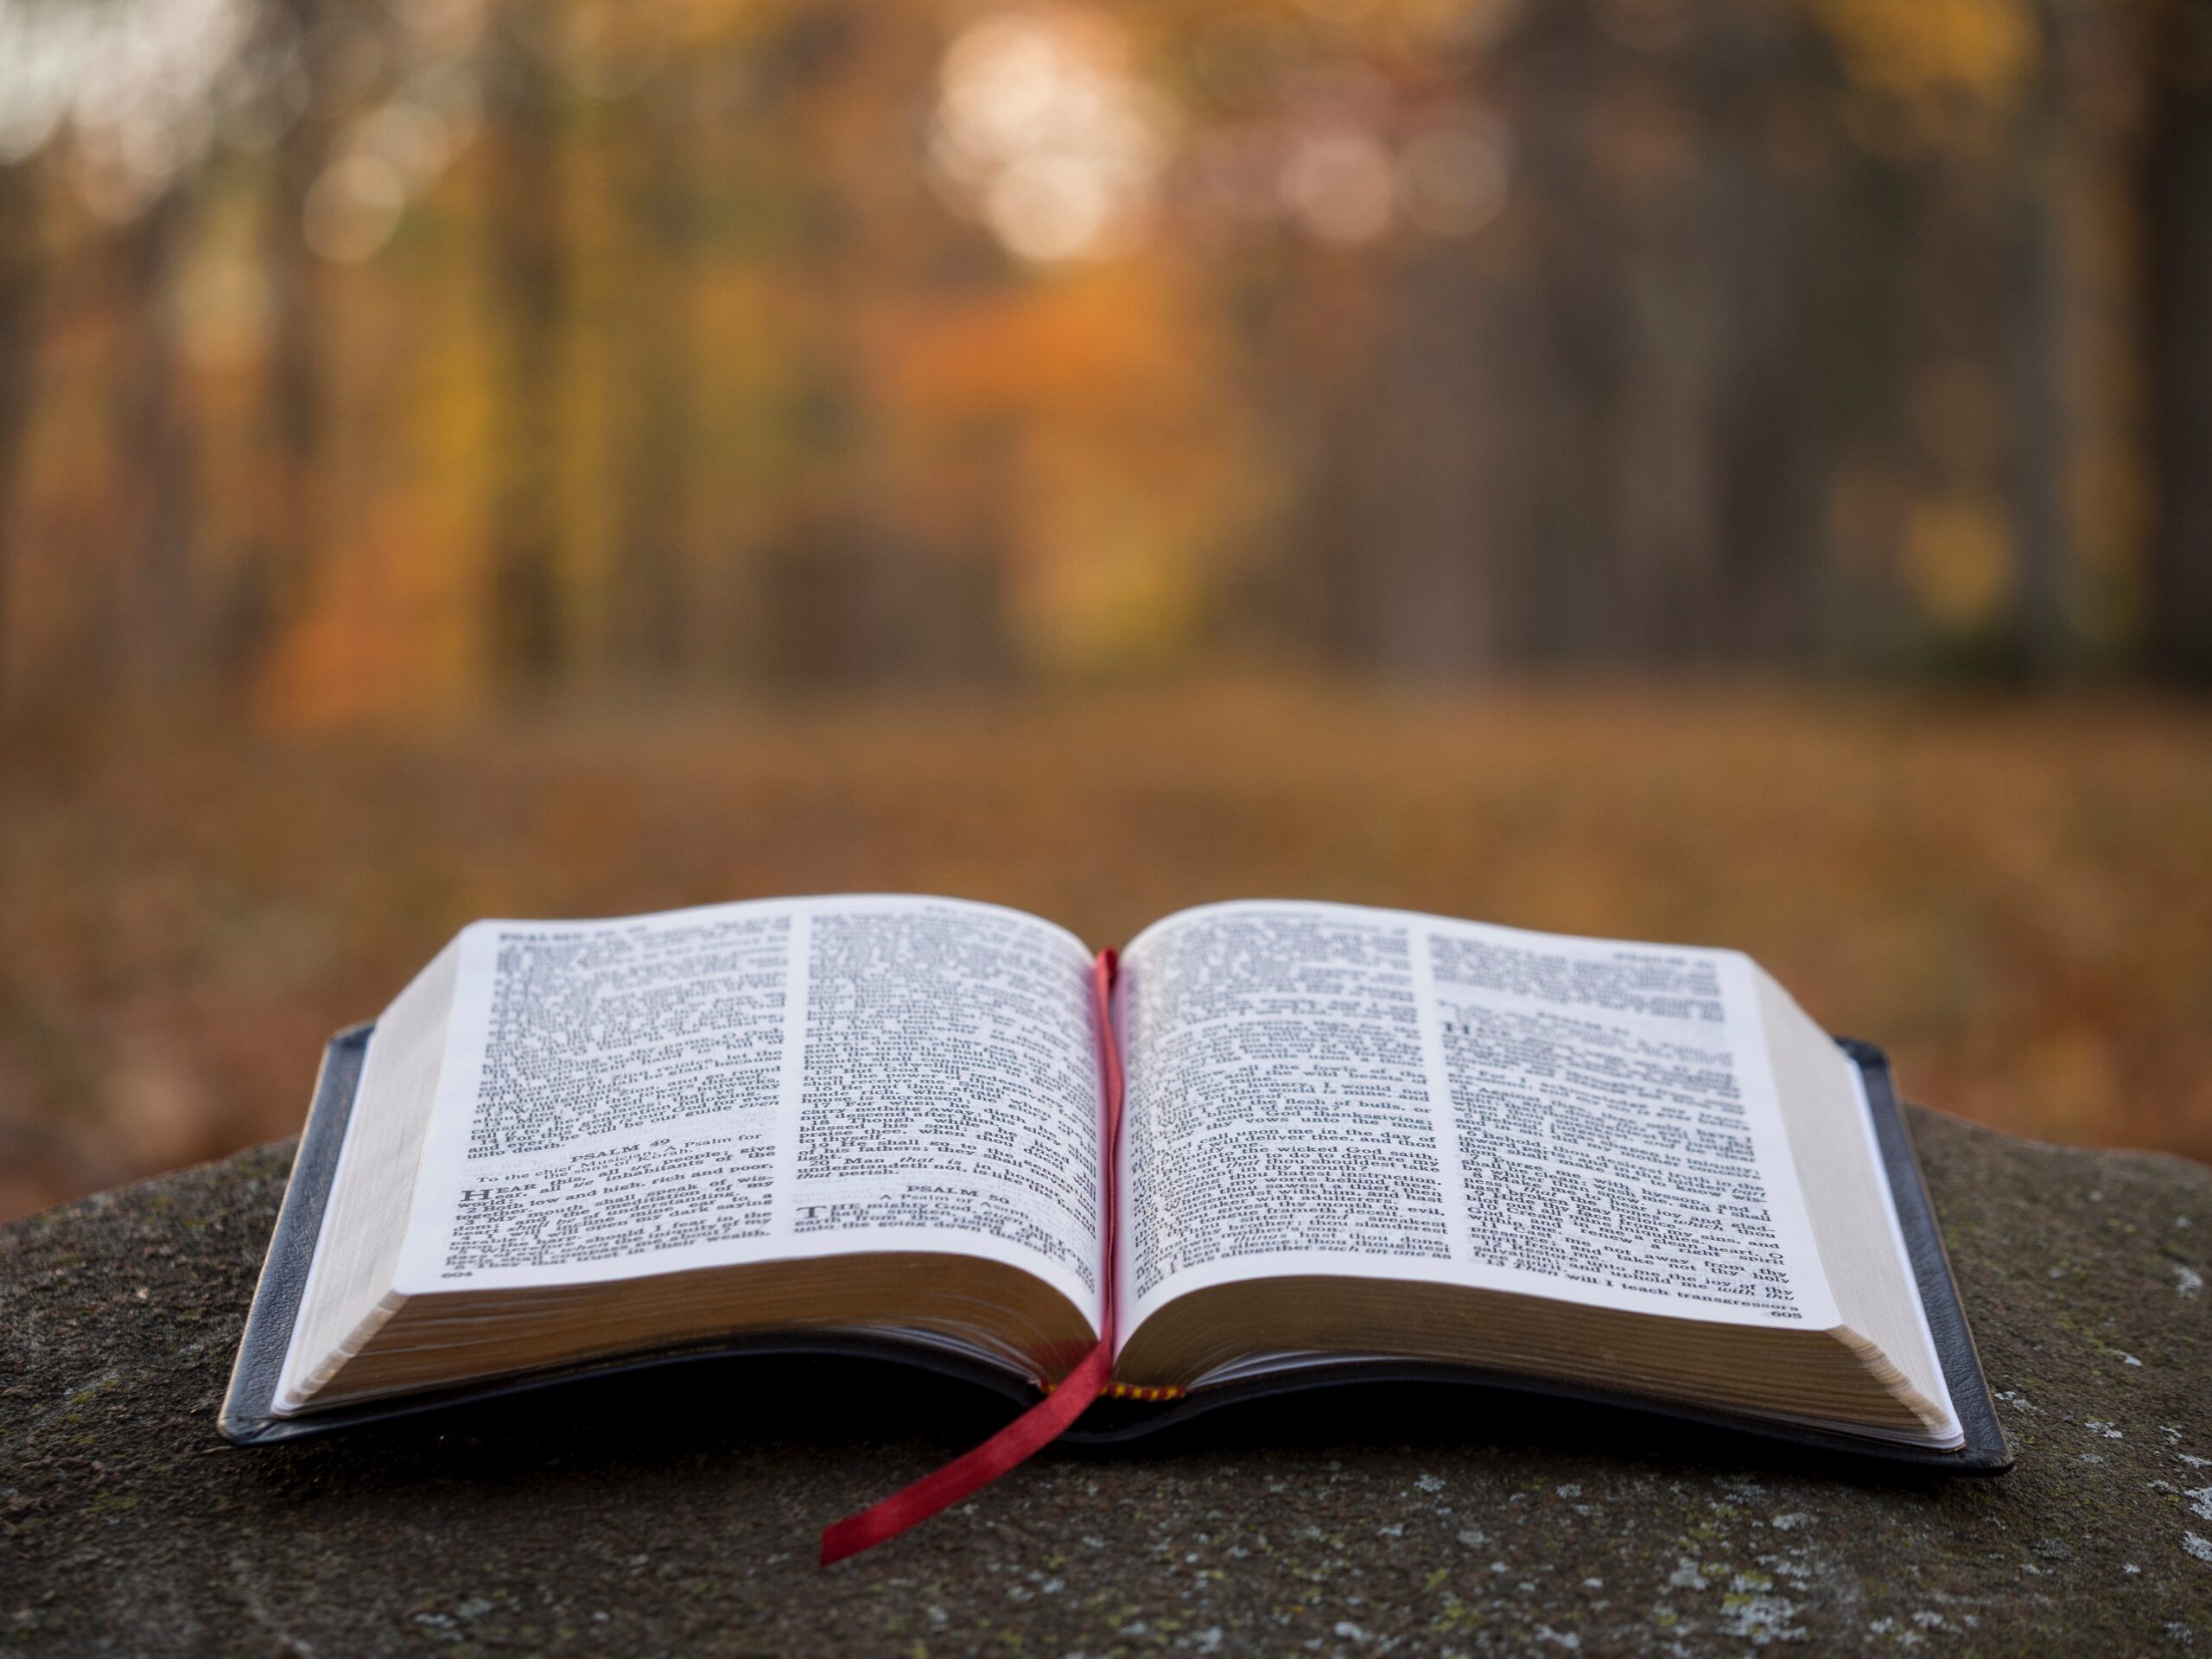 A bible lays open for worship in an outdoor setting